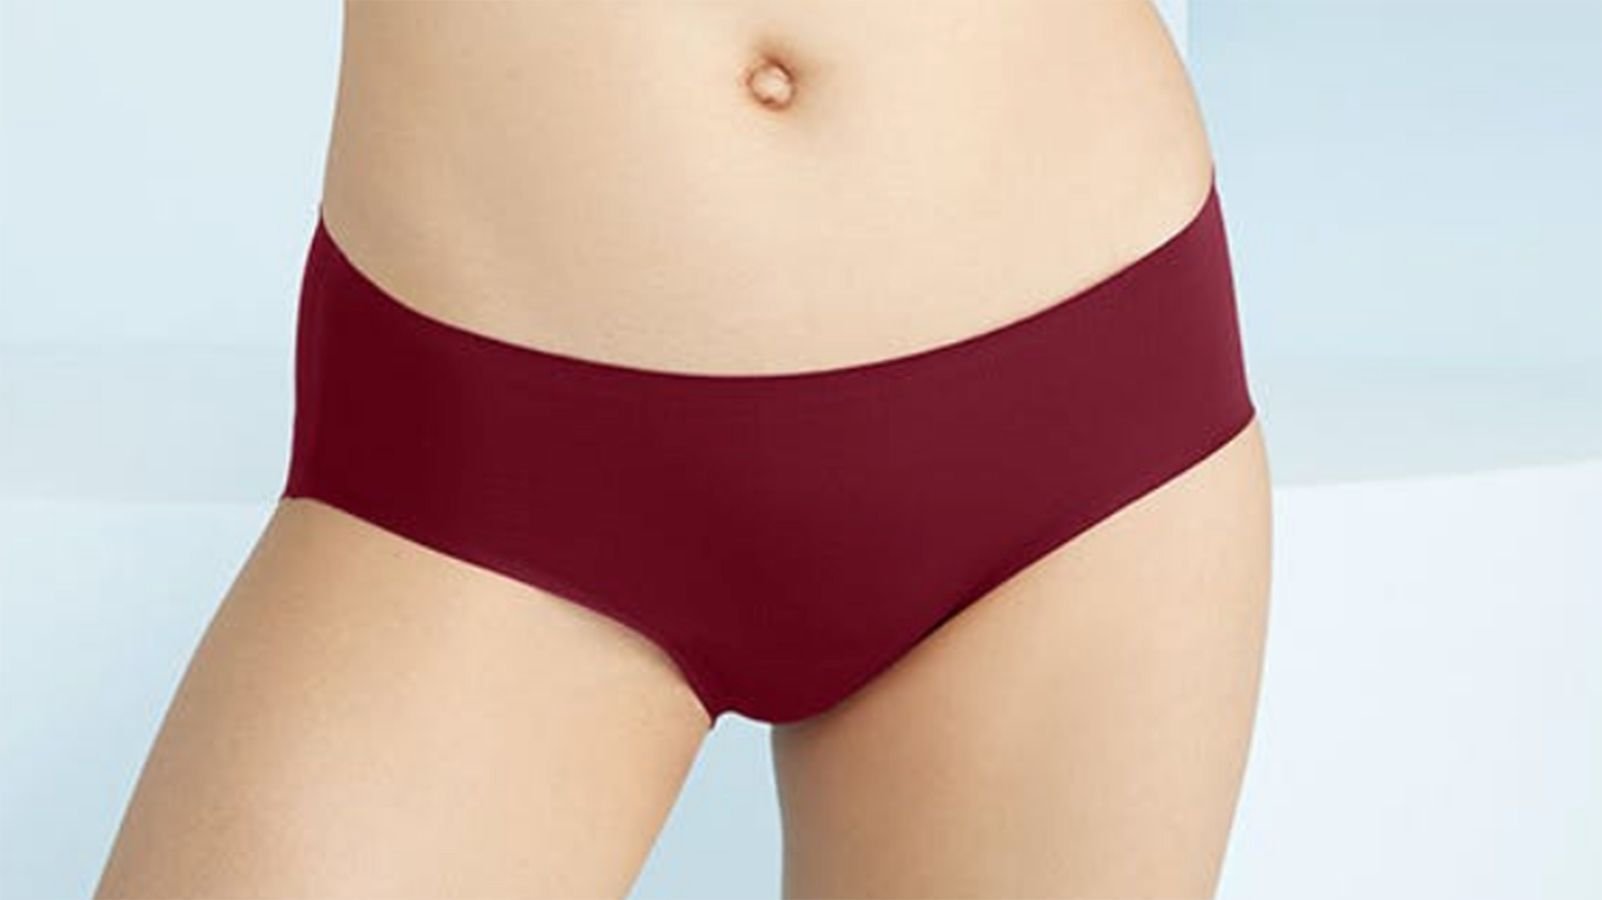 Calvin Klein Underwear Basics at Camp Connection – Camp Connection General  Store